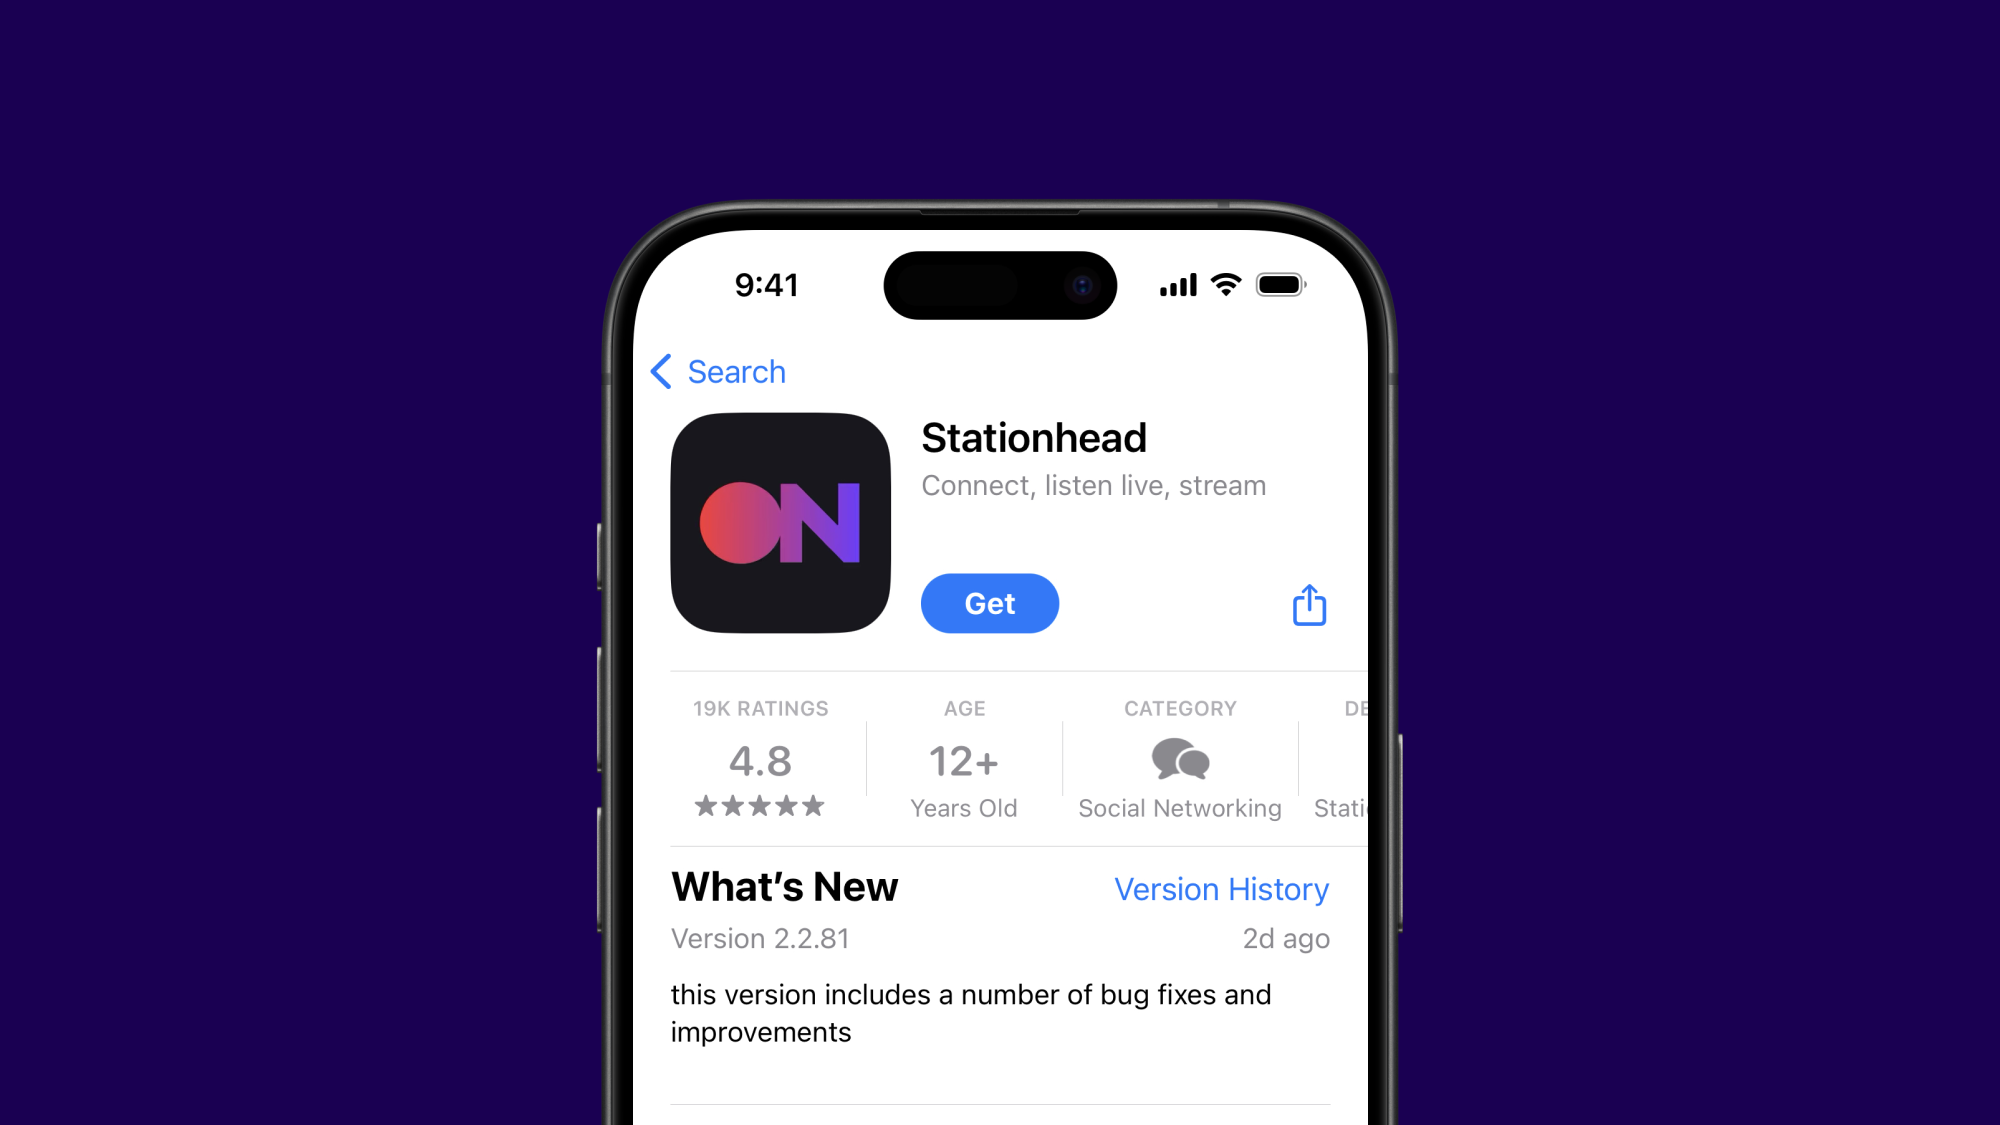 Download Stationhead on the App Store